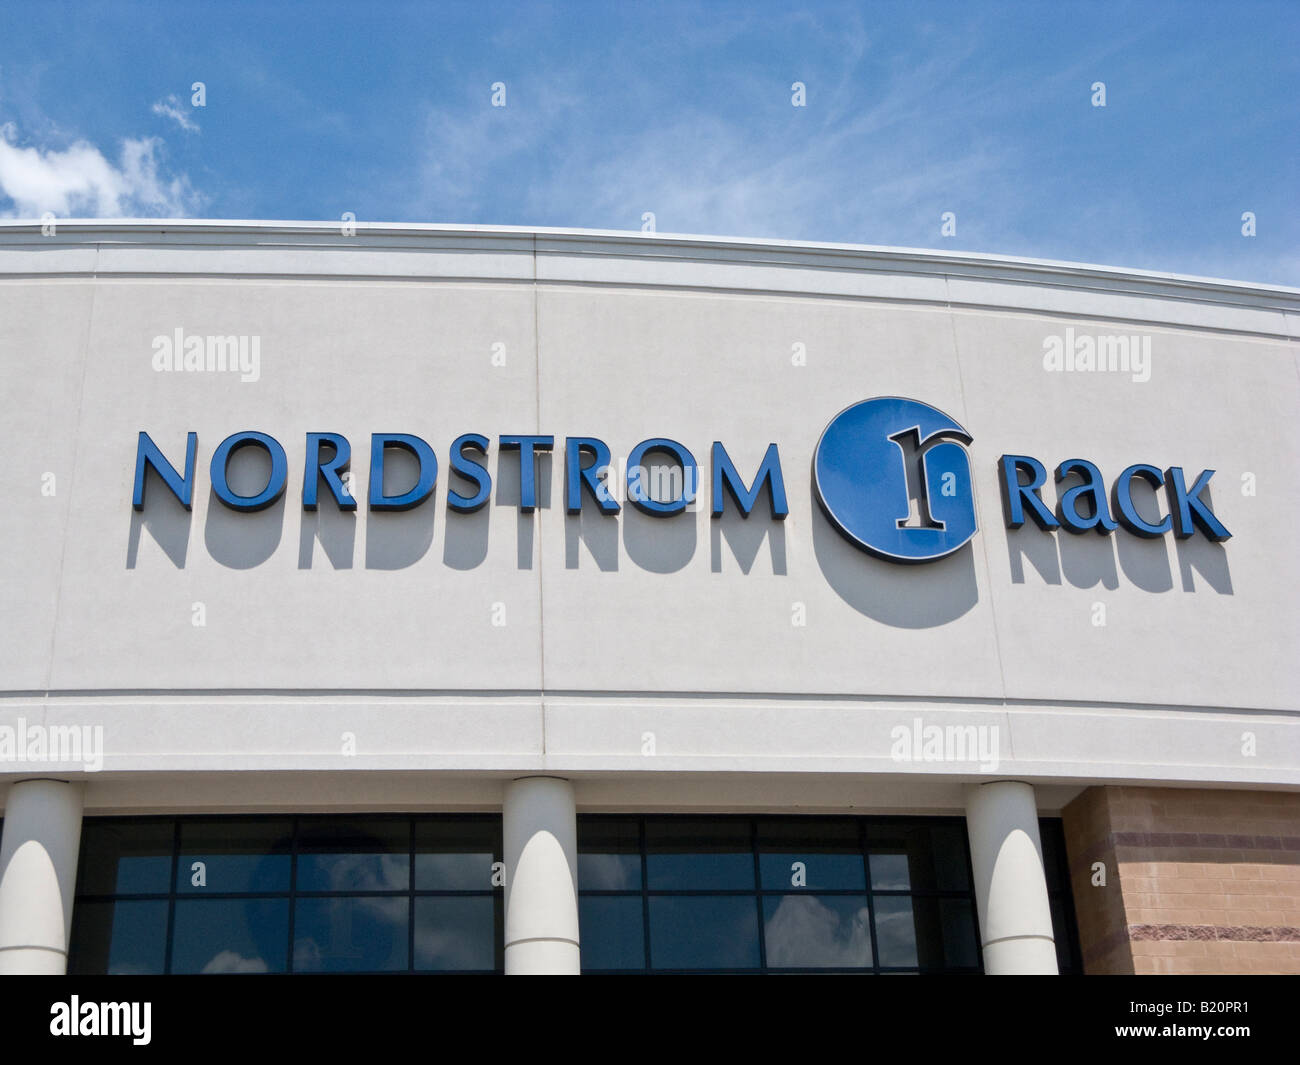 Nordstrom Rack store, King of Prussia Mall, New York, USA Banque D'Images